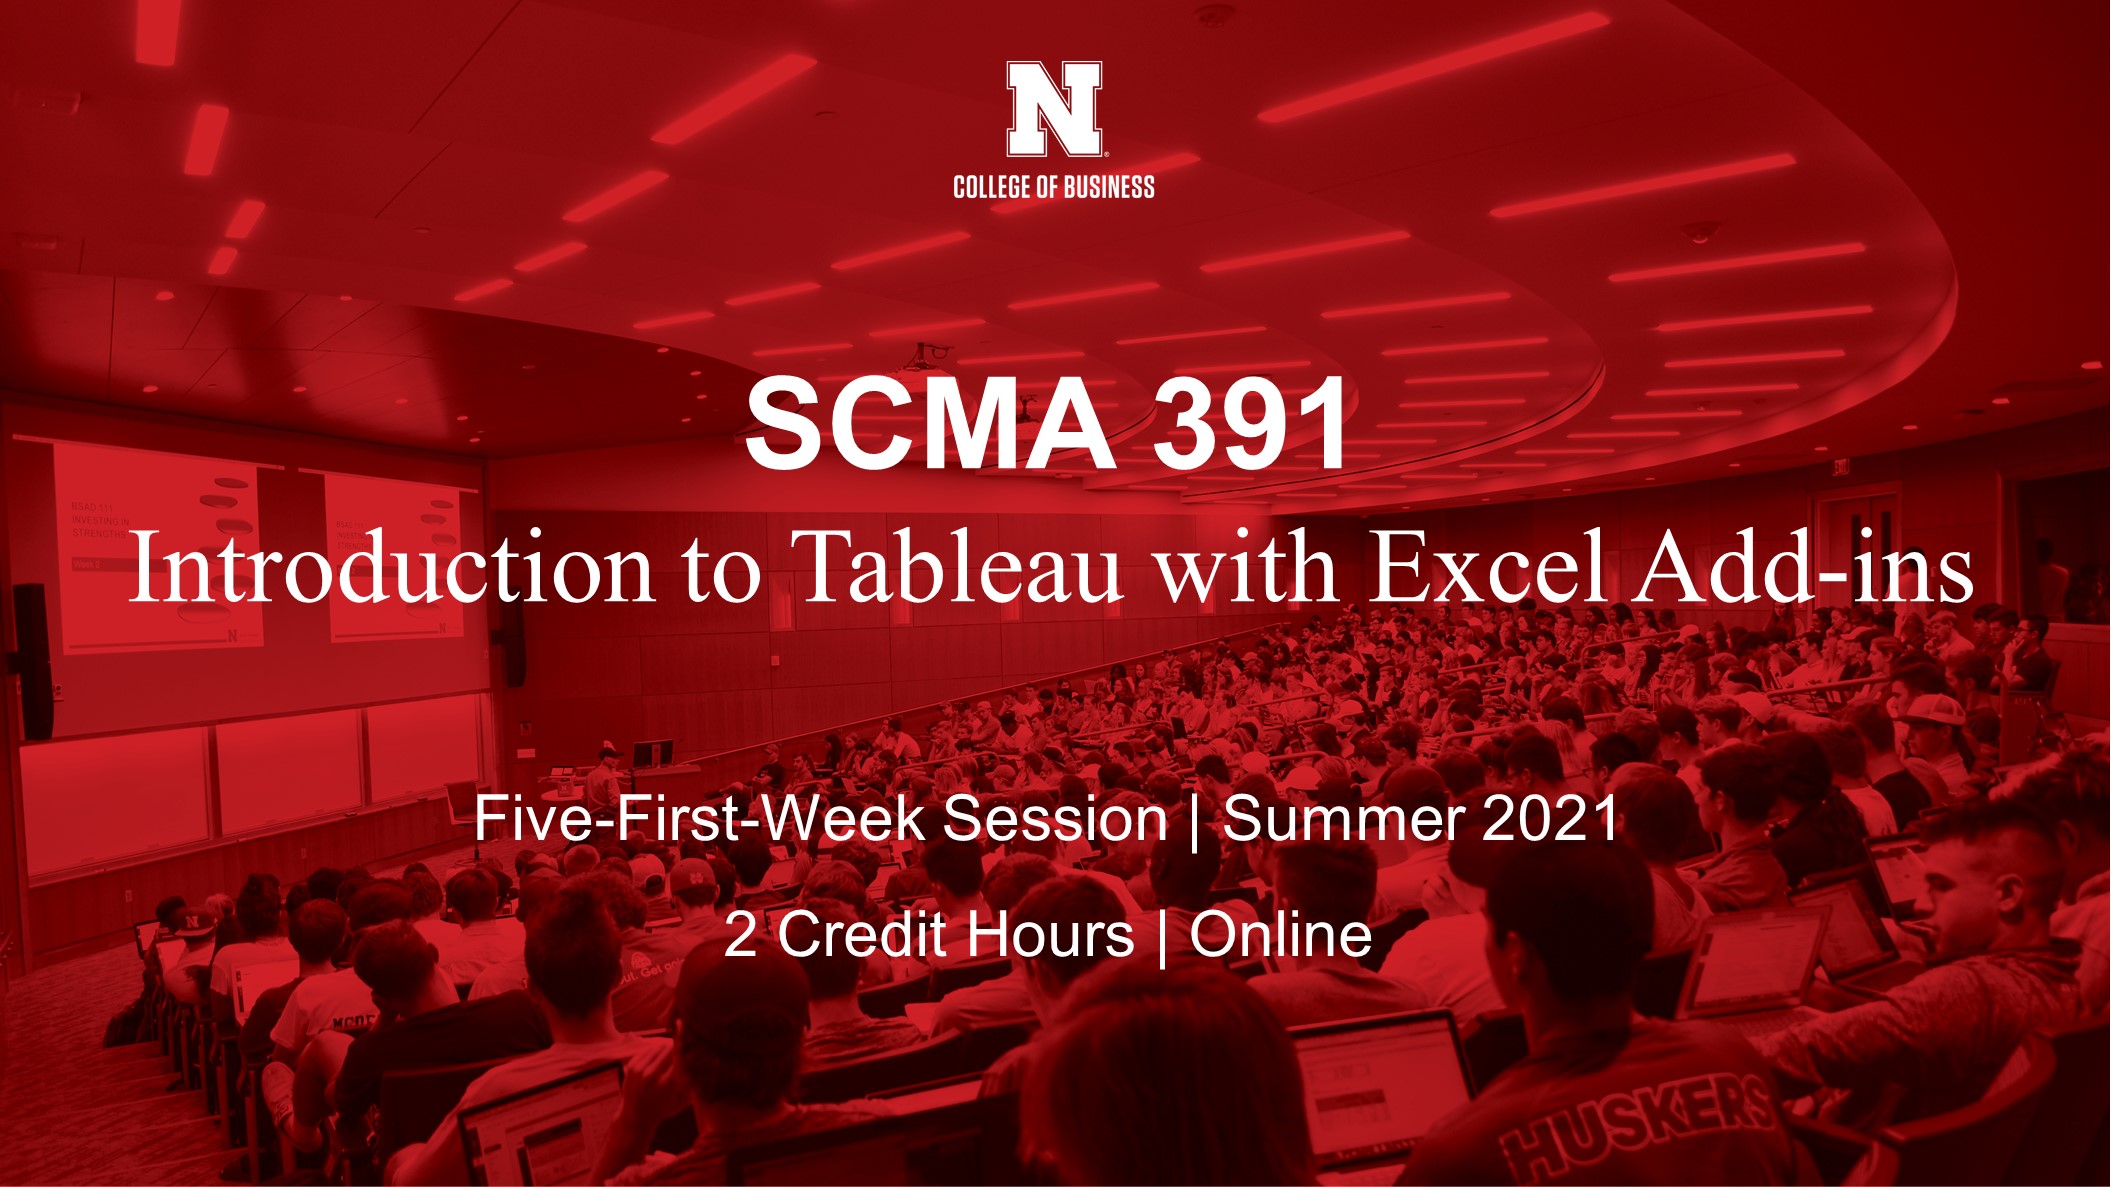 Featured Summer Course: SCMA 391 - Introduction to Tableau with Excel Add-ins